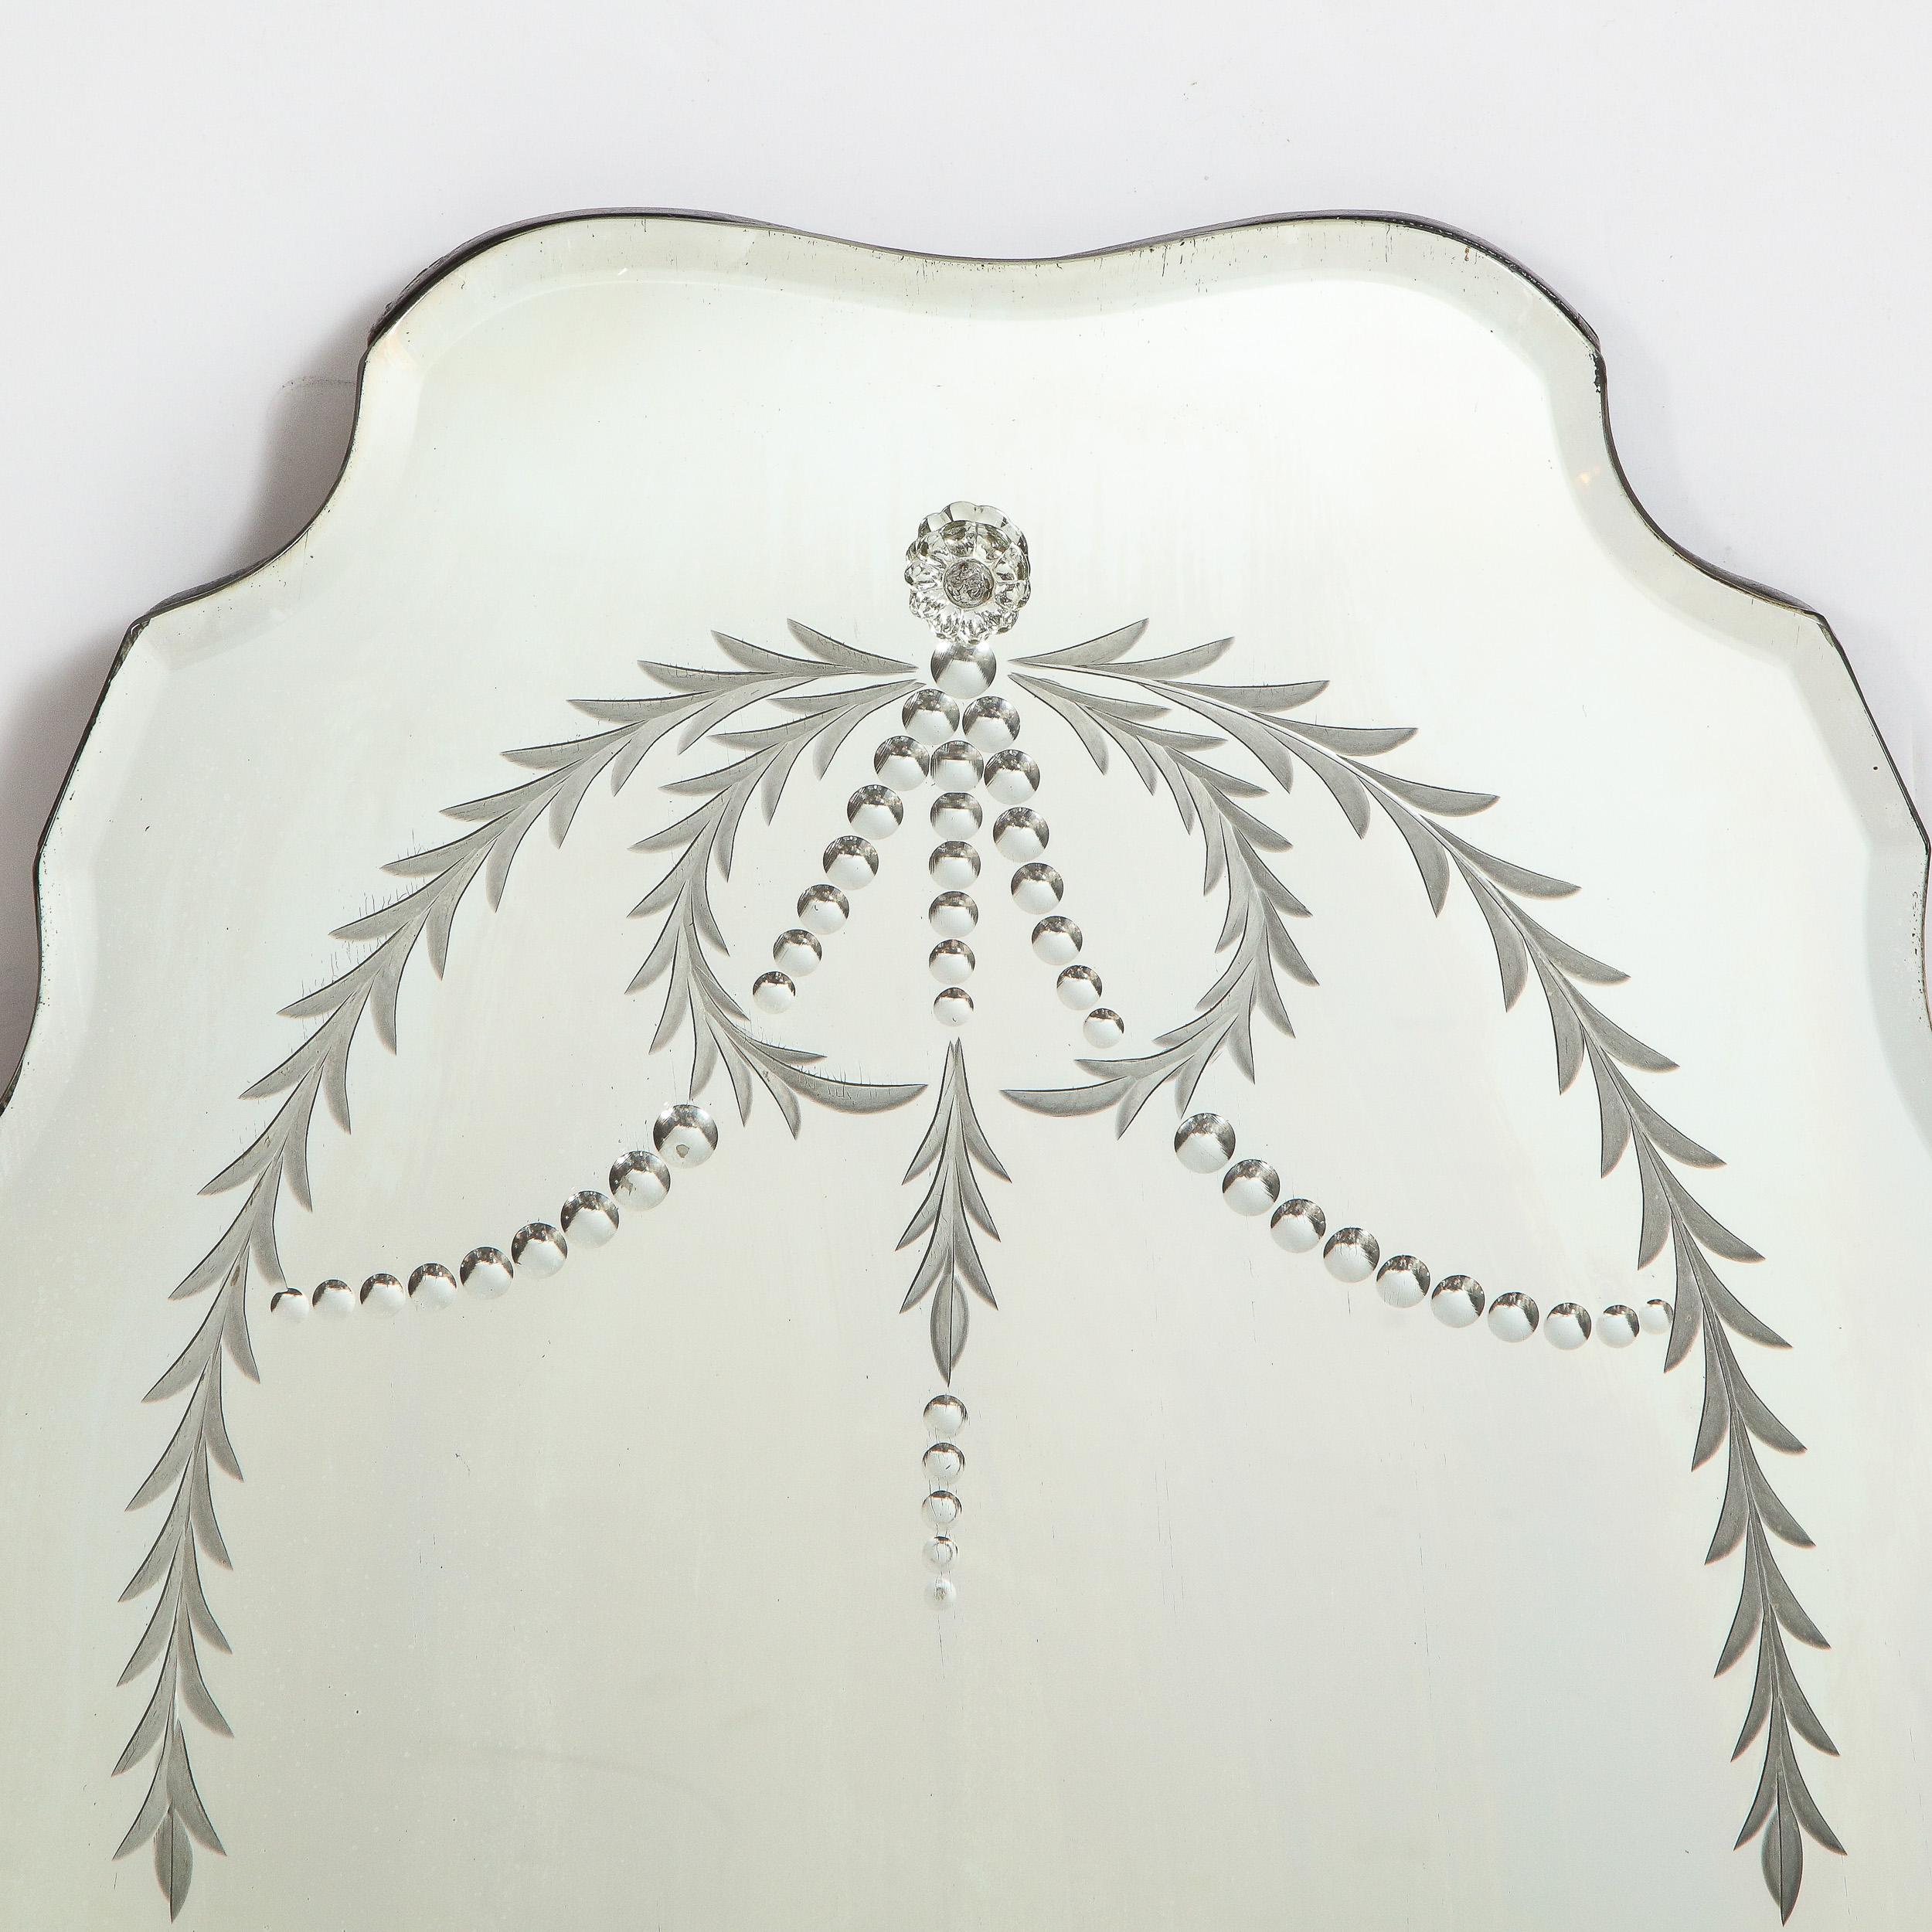 American Art Deco Mirror with Laurel Wreath Detailing, Chain Beveling & Scalloped Borders